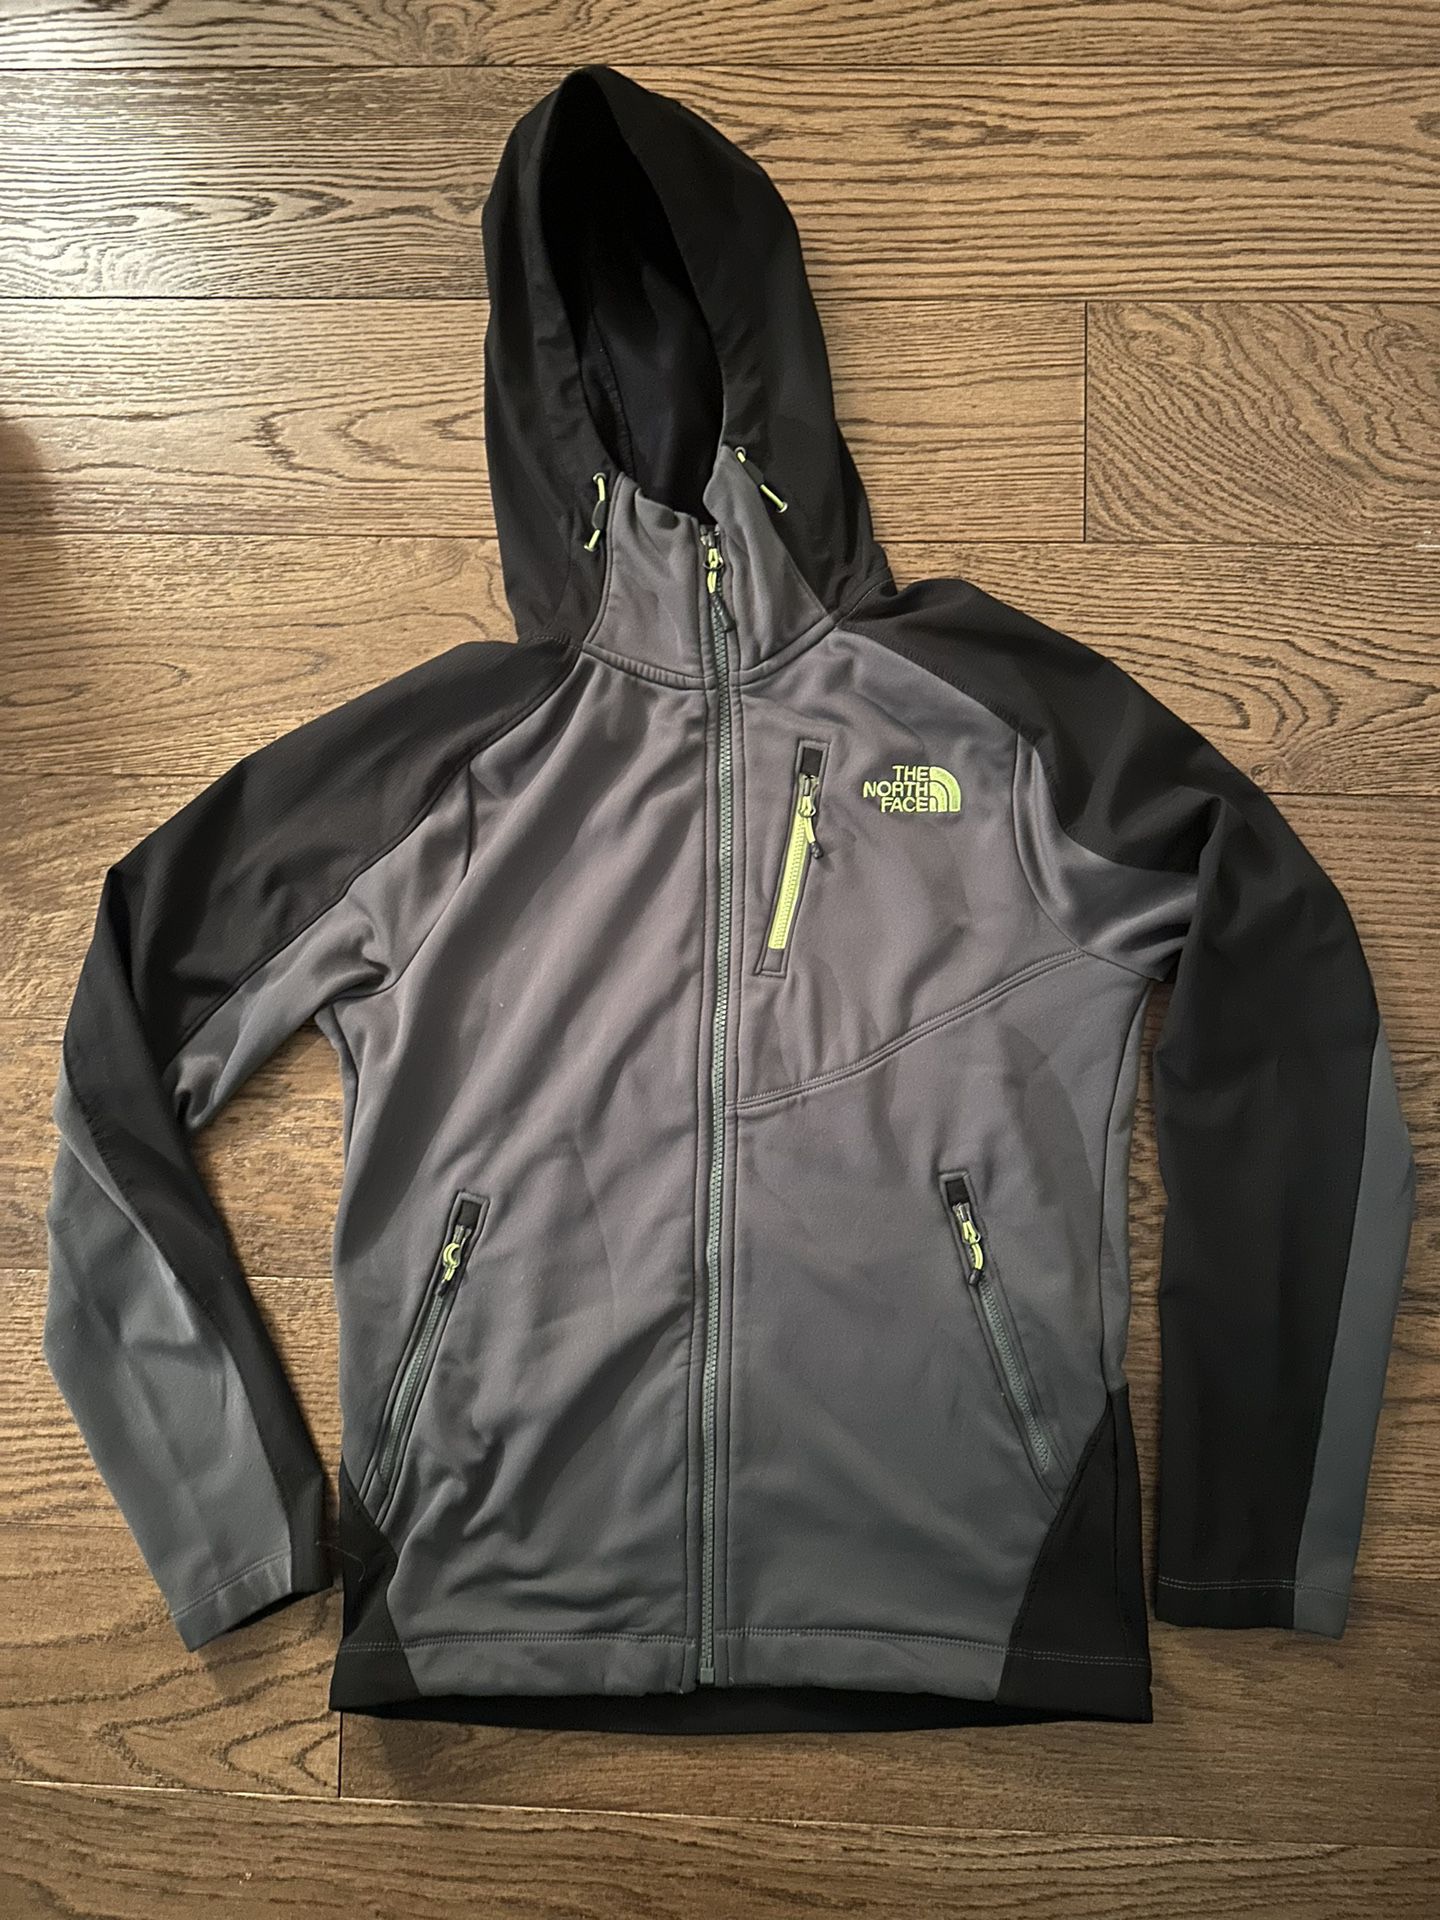 North Face Mens Hooded Zip Up Jacket  Small